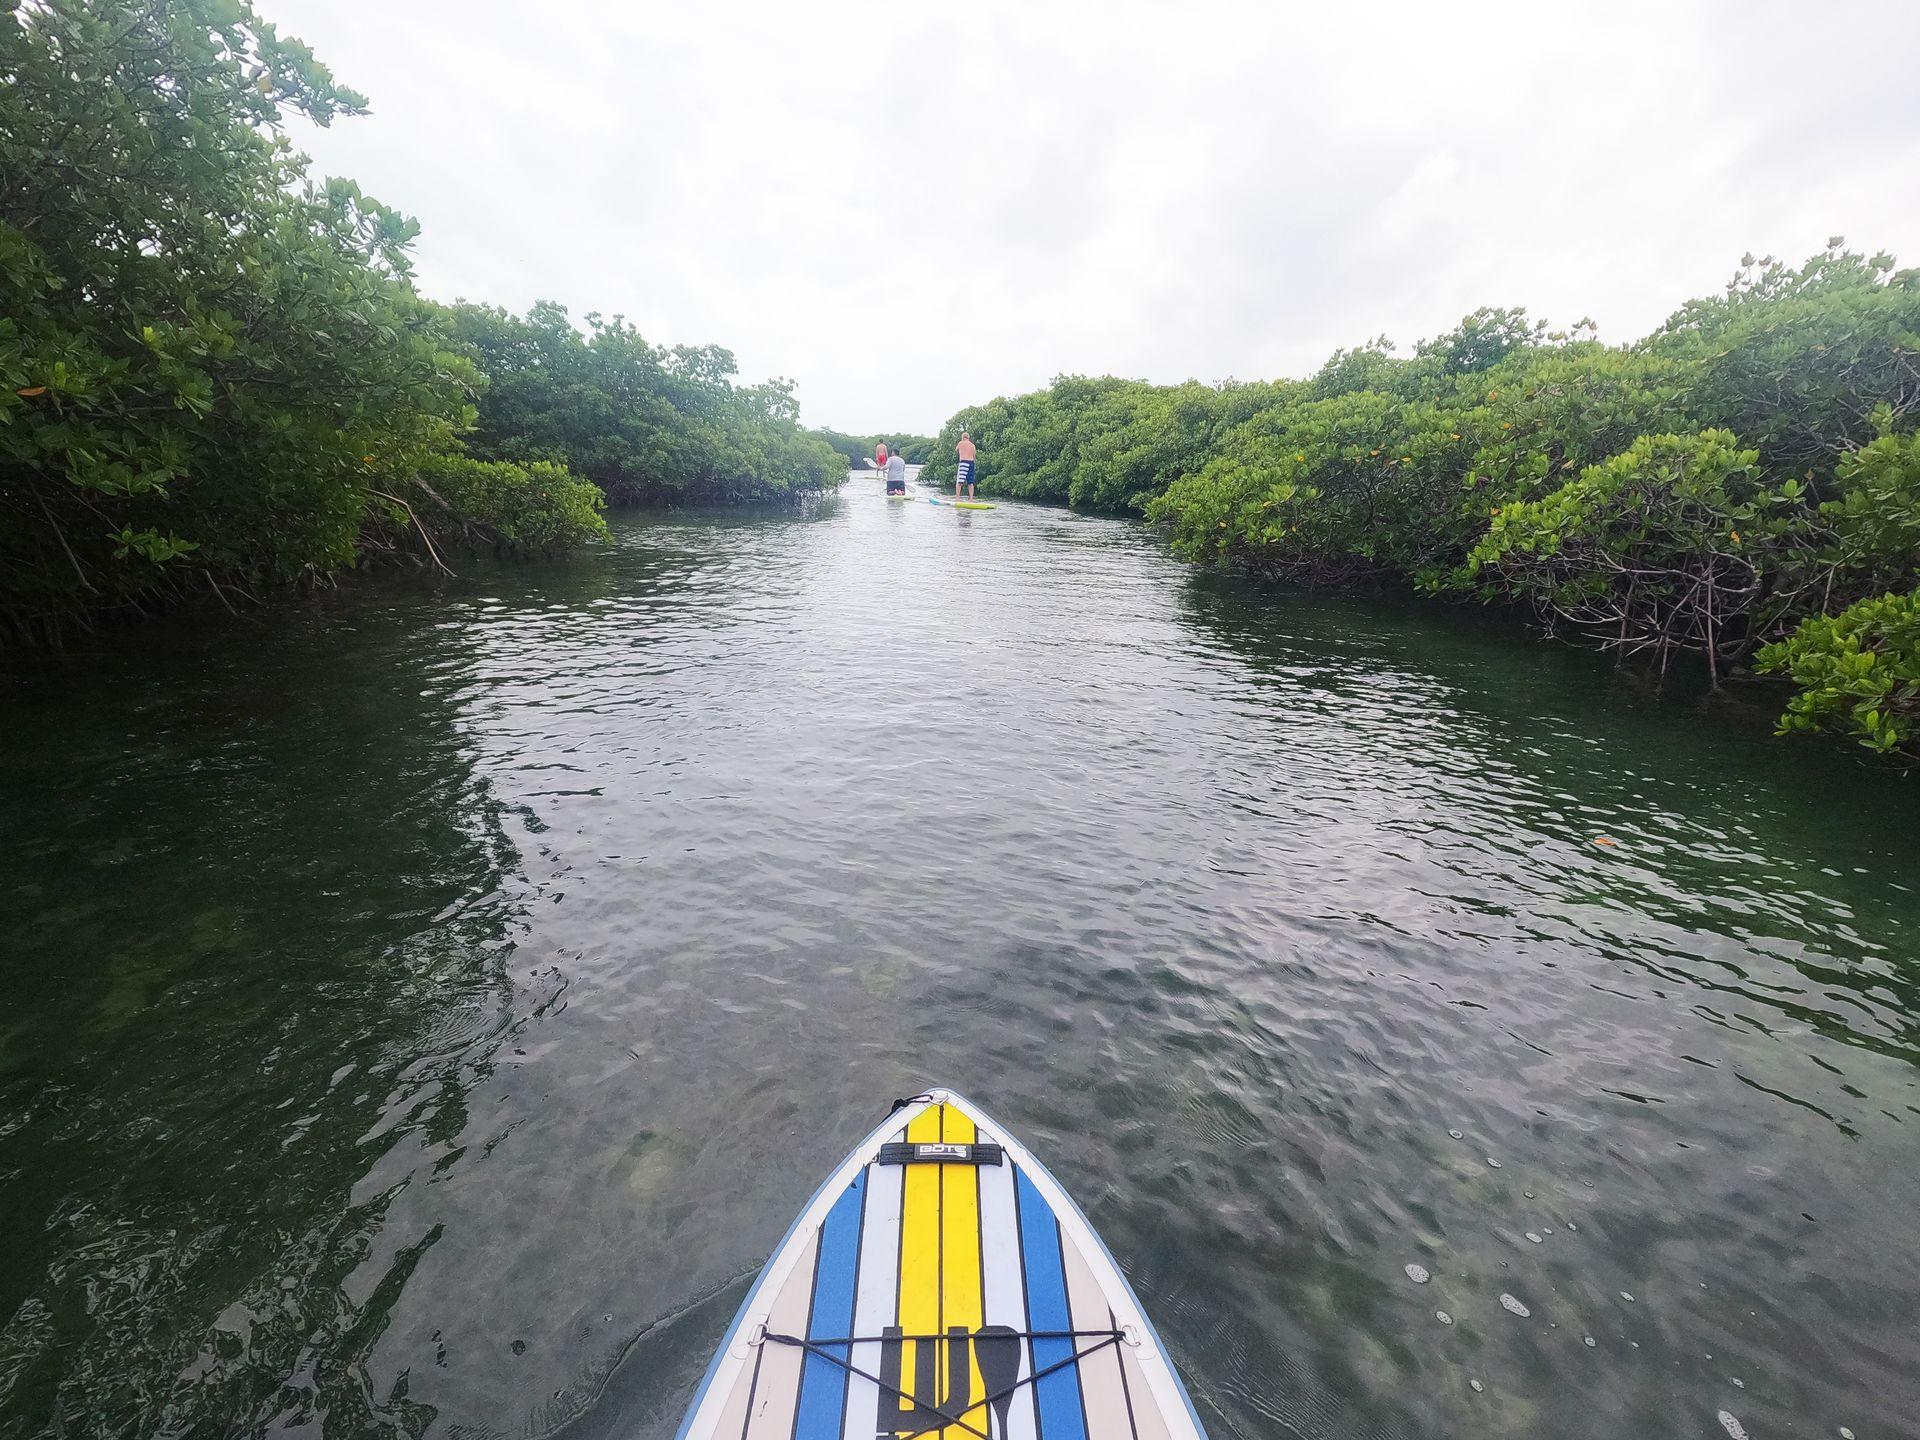 The front of a paddle board in the center looking out at the water with mangrove trees on either side